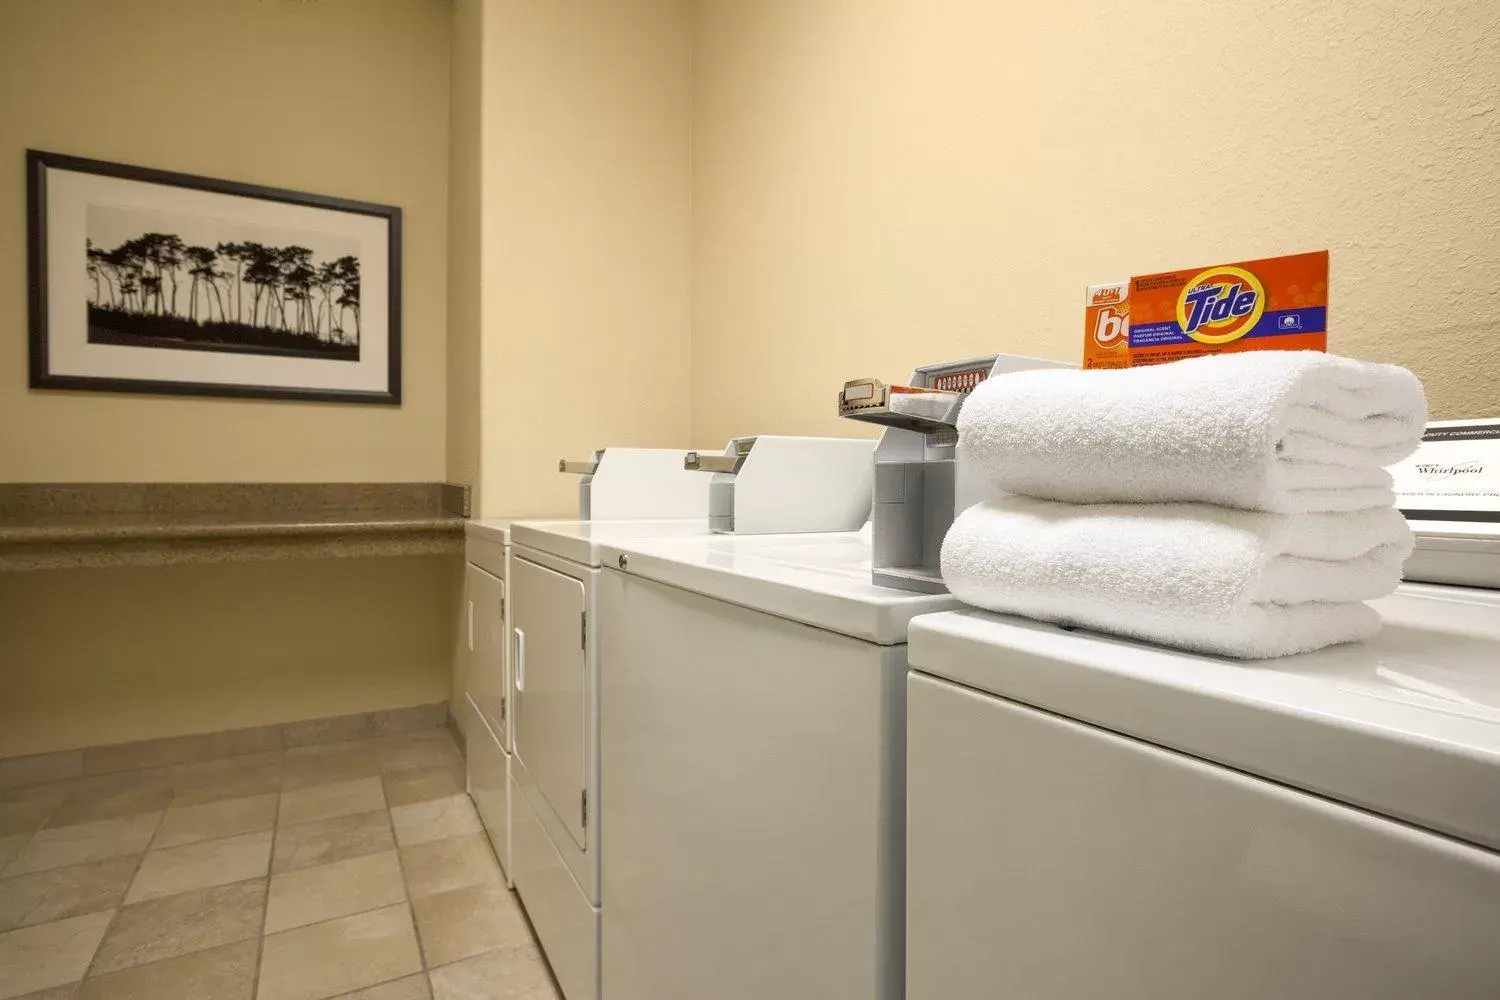 Area and facilities in Country Inn & Suites by Radisson, Ashland - Hanover, VA